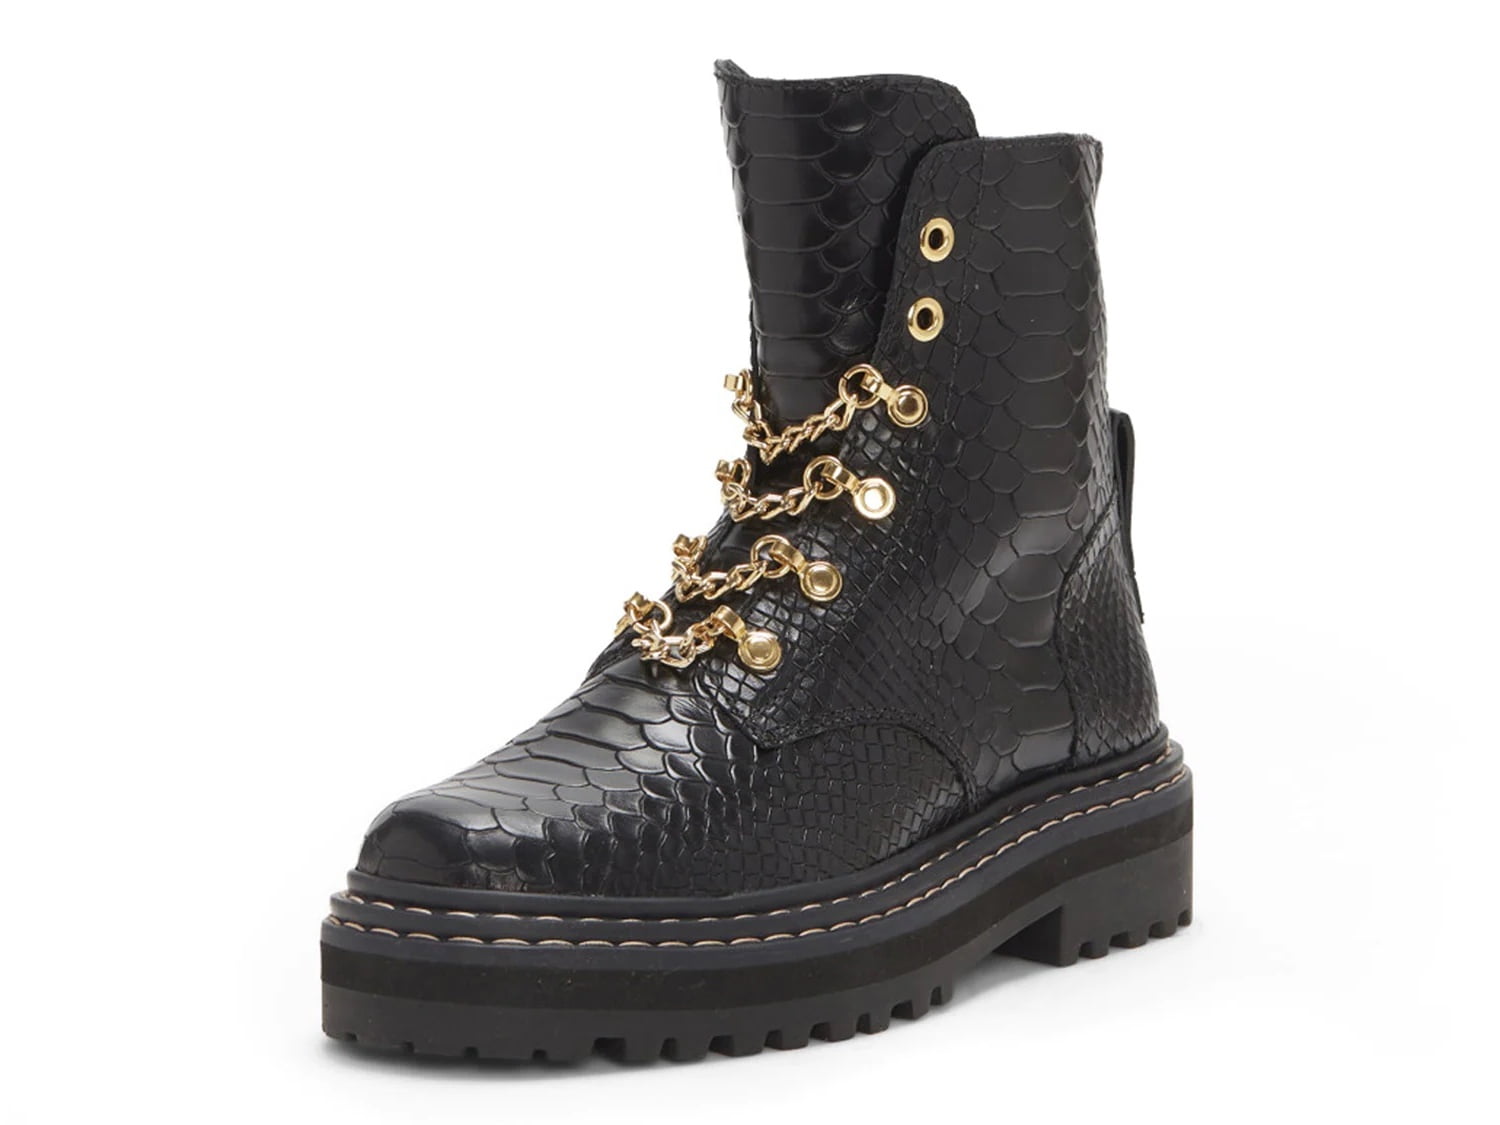 Vince Camuto Popinta Black Smooth Snake Closure Rounded Toe Chain Detailed  Boots (Black Smooth Snake, 6.5) 